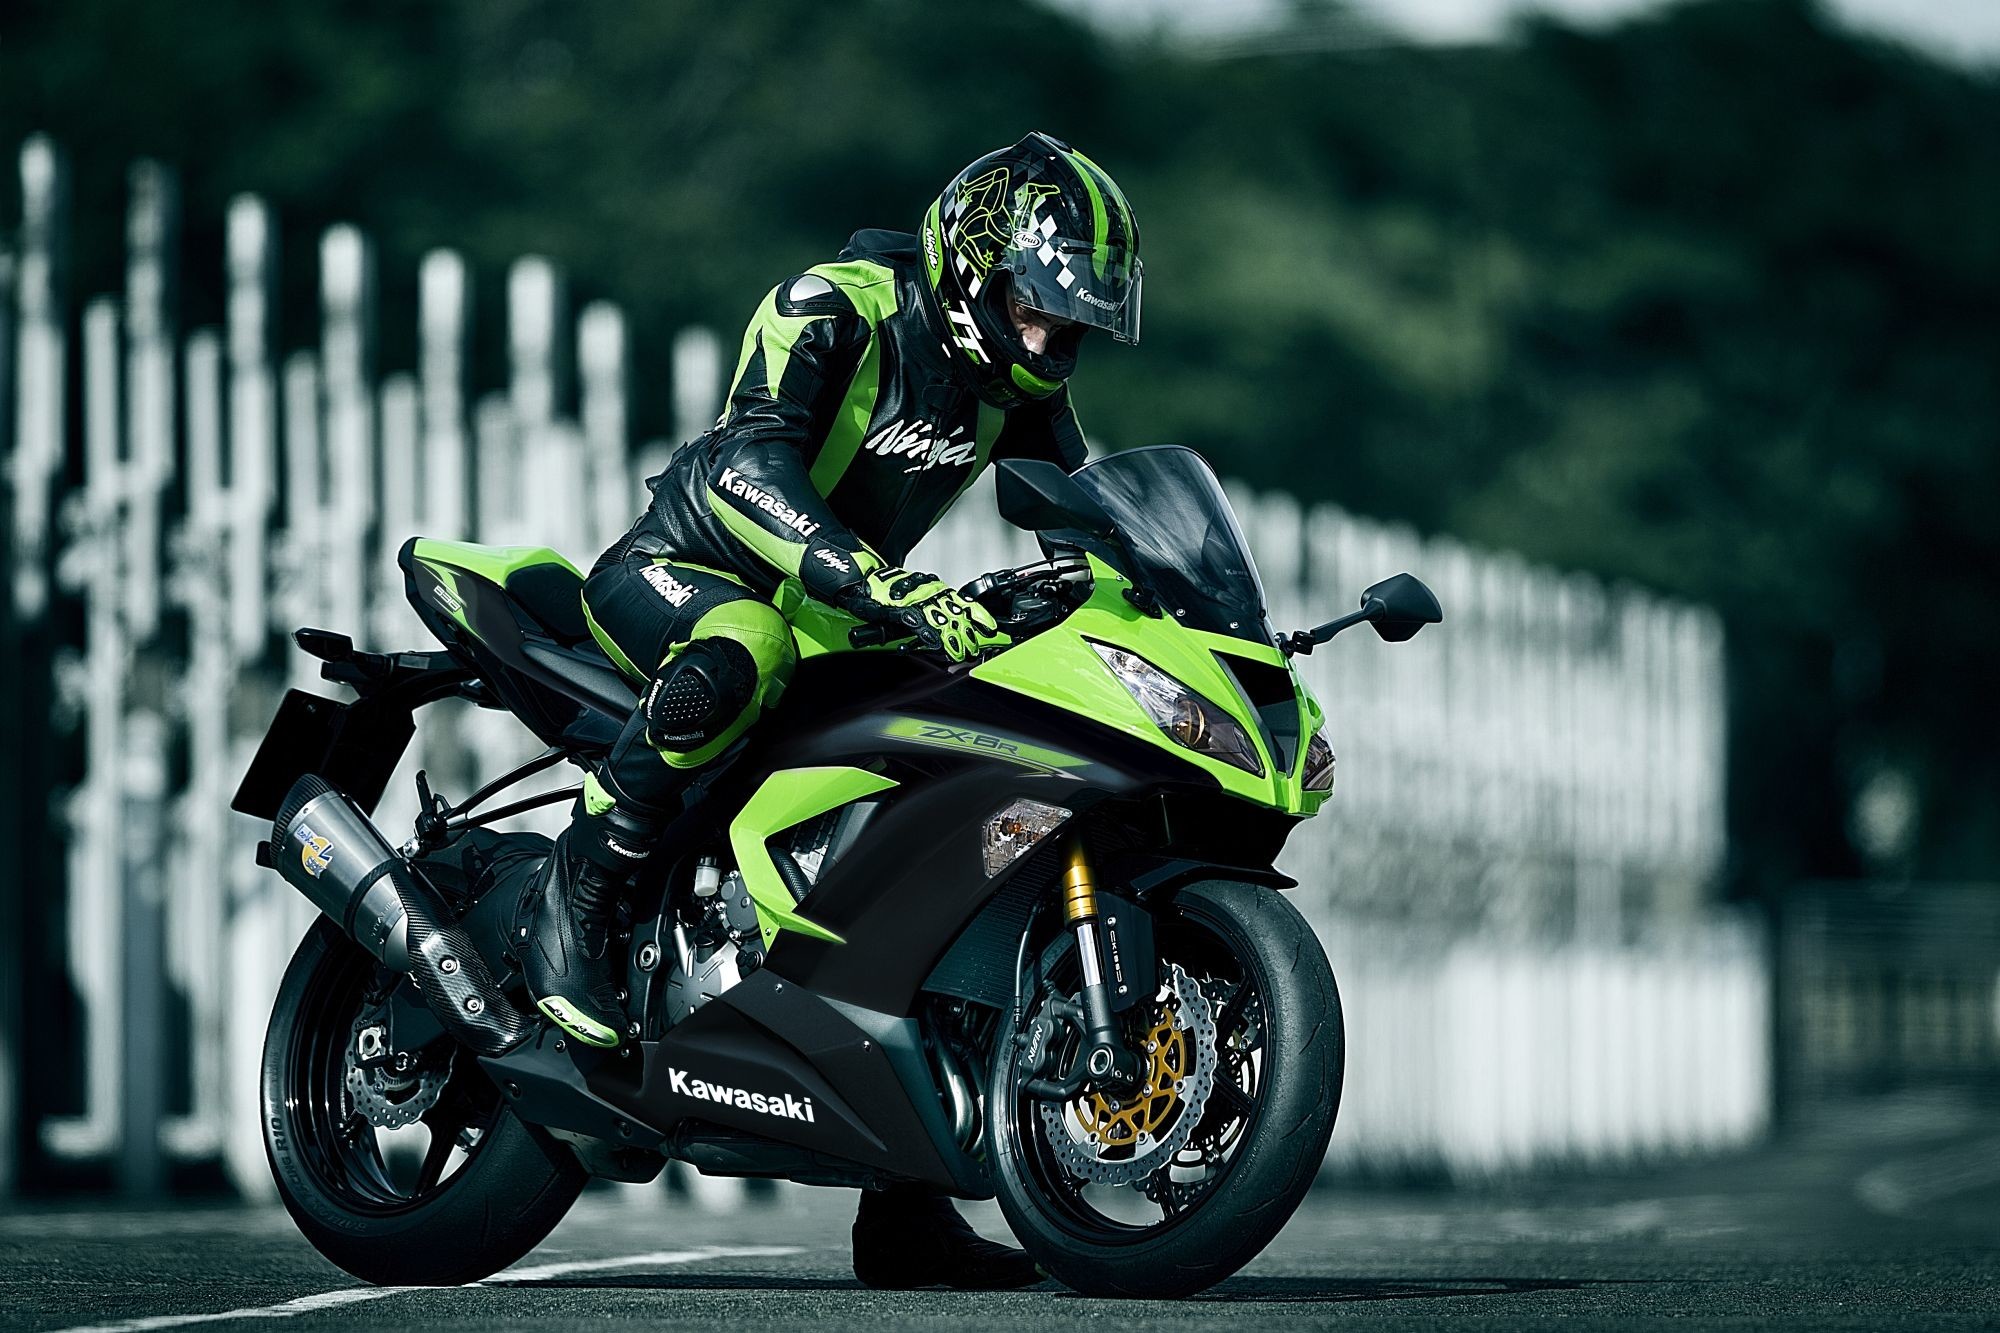 2000x1333 2011 Zx6R Wallpaper Pictures To Pin On Pinterest